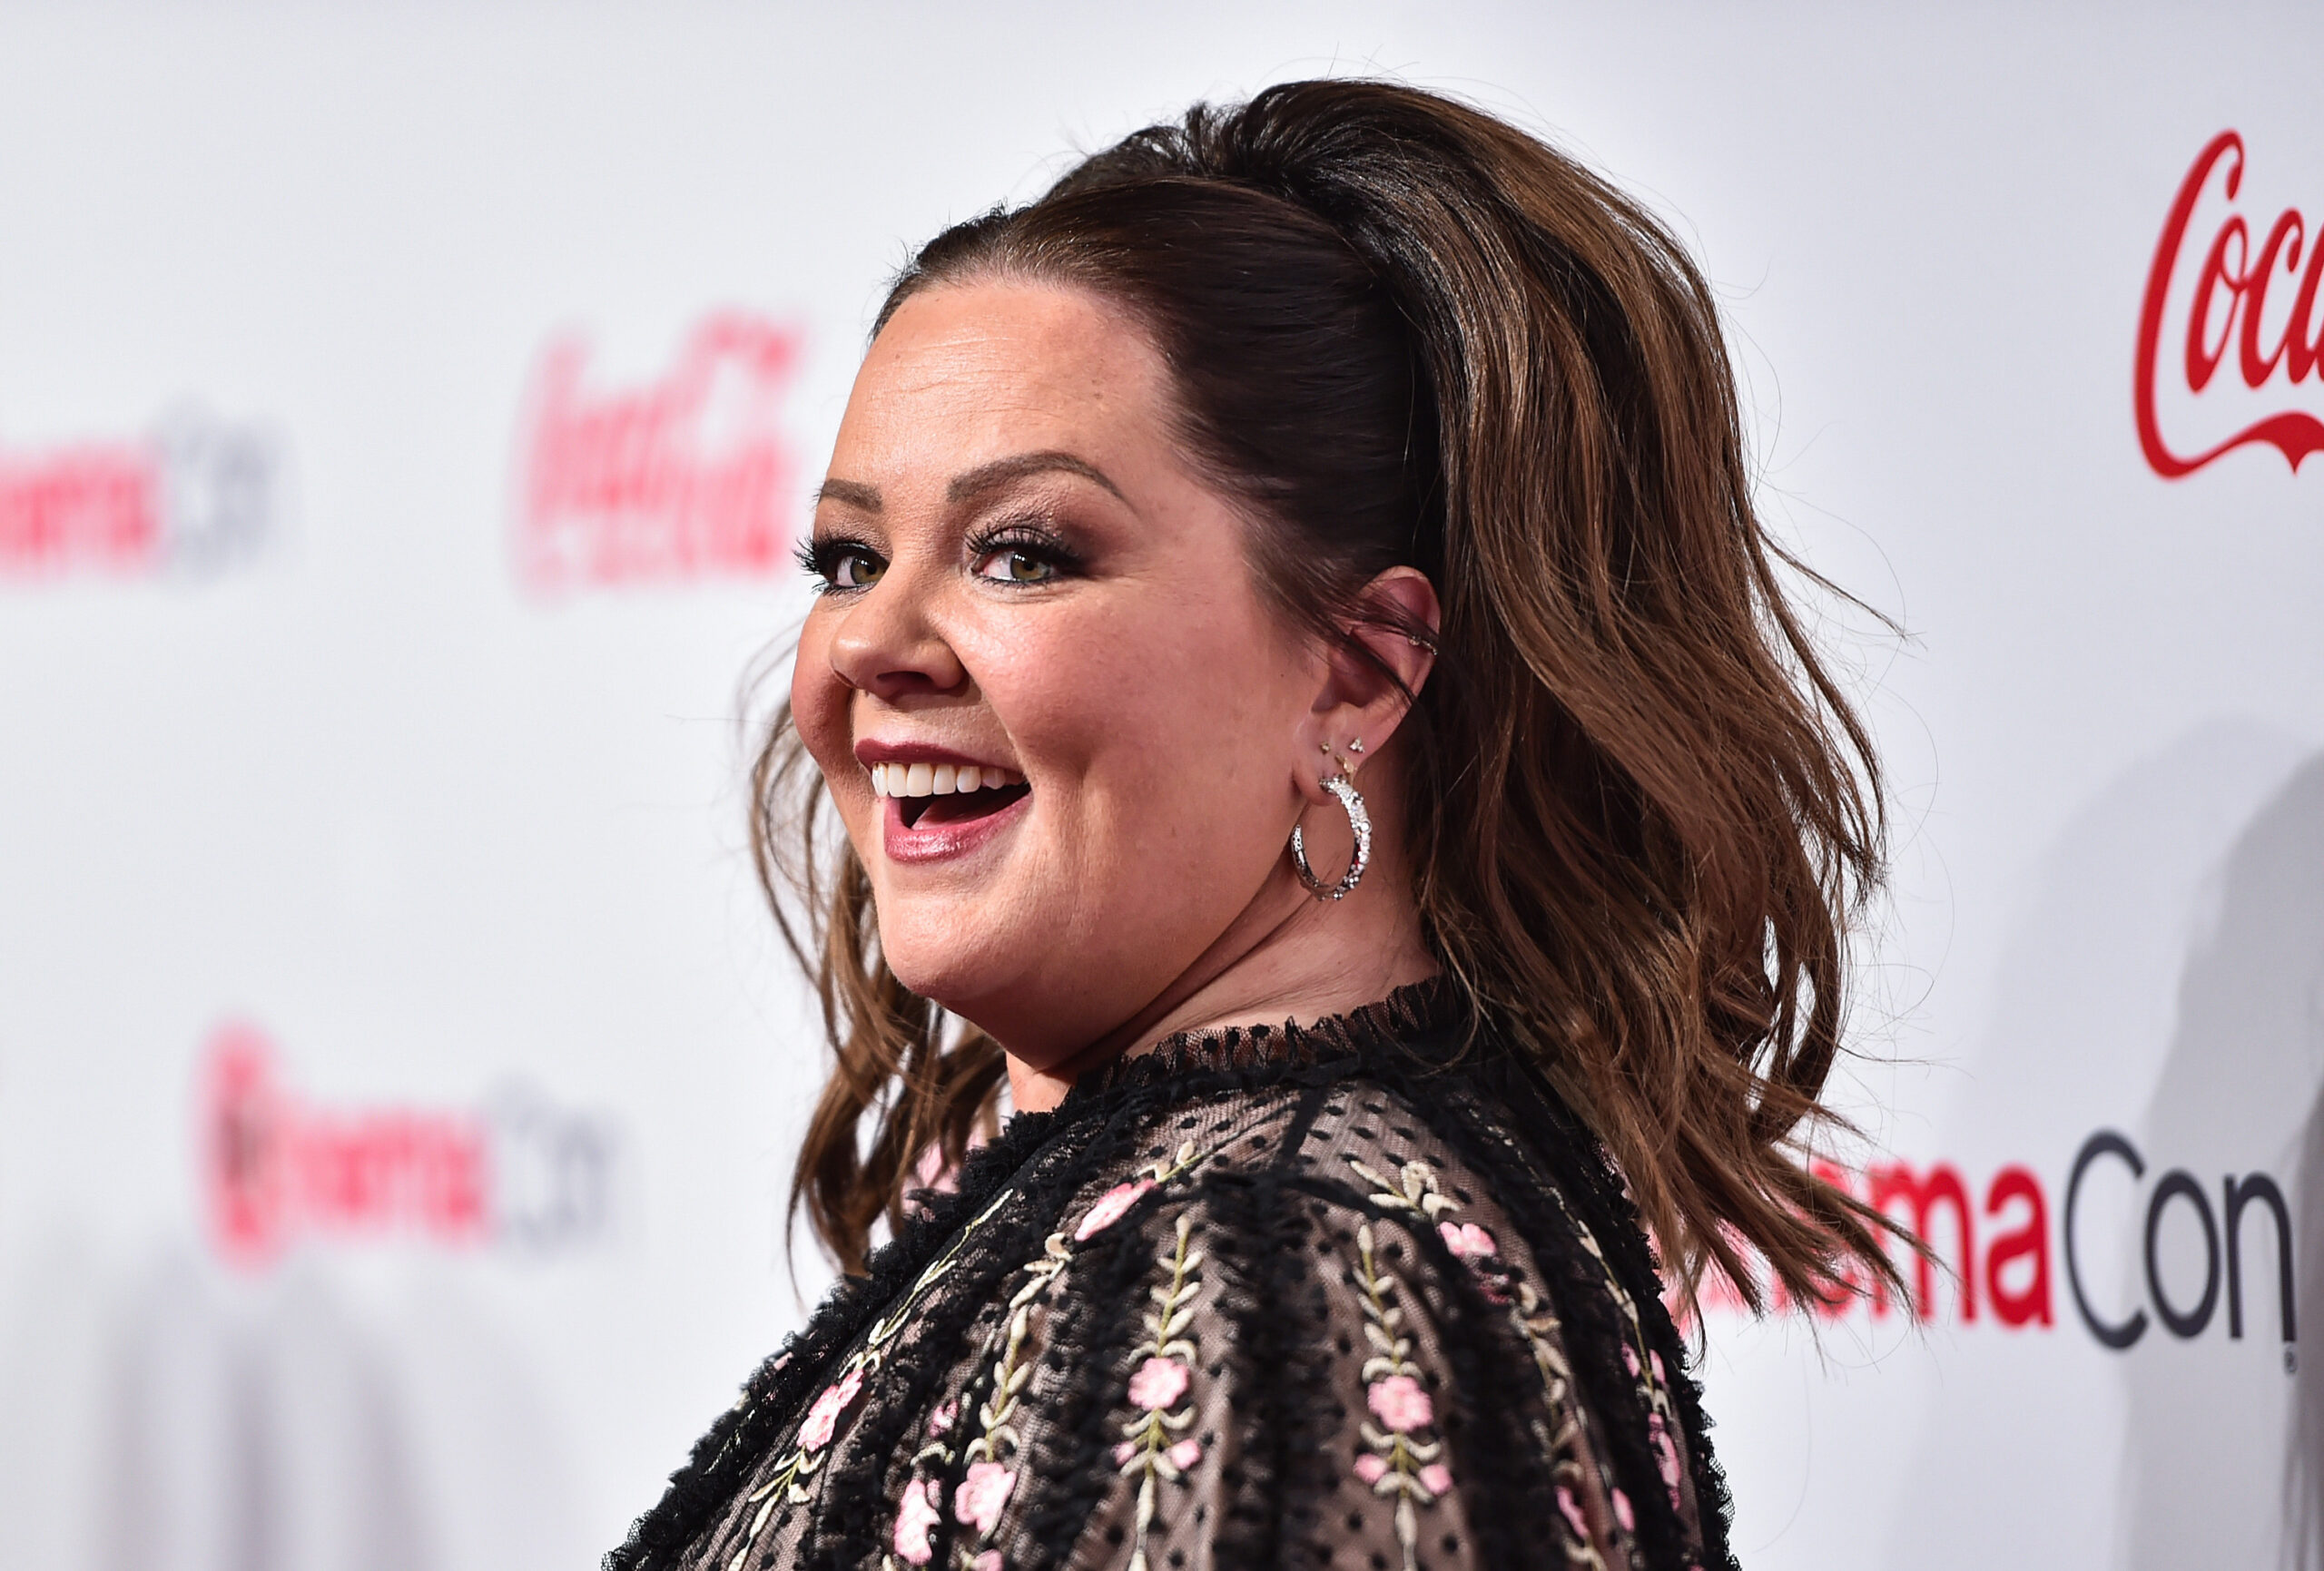 Melissa McCarthy felt physically ill on a “volatile, hostile” set where people were weeping.